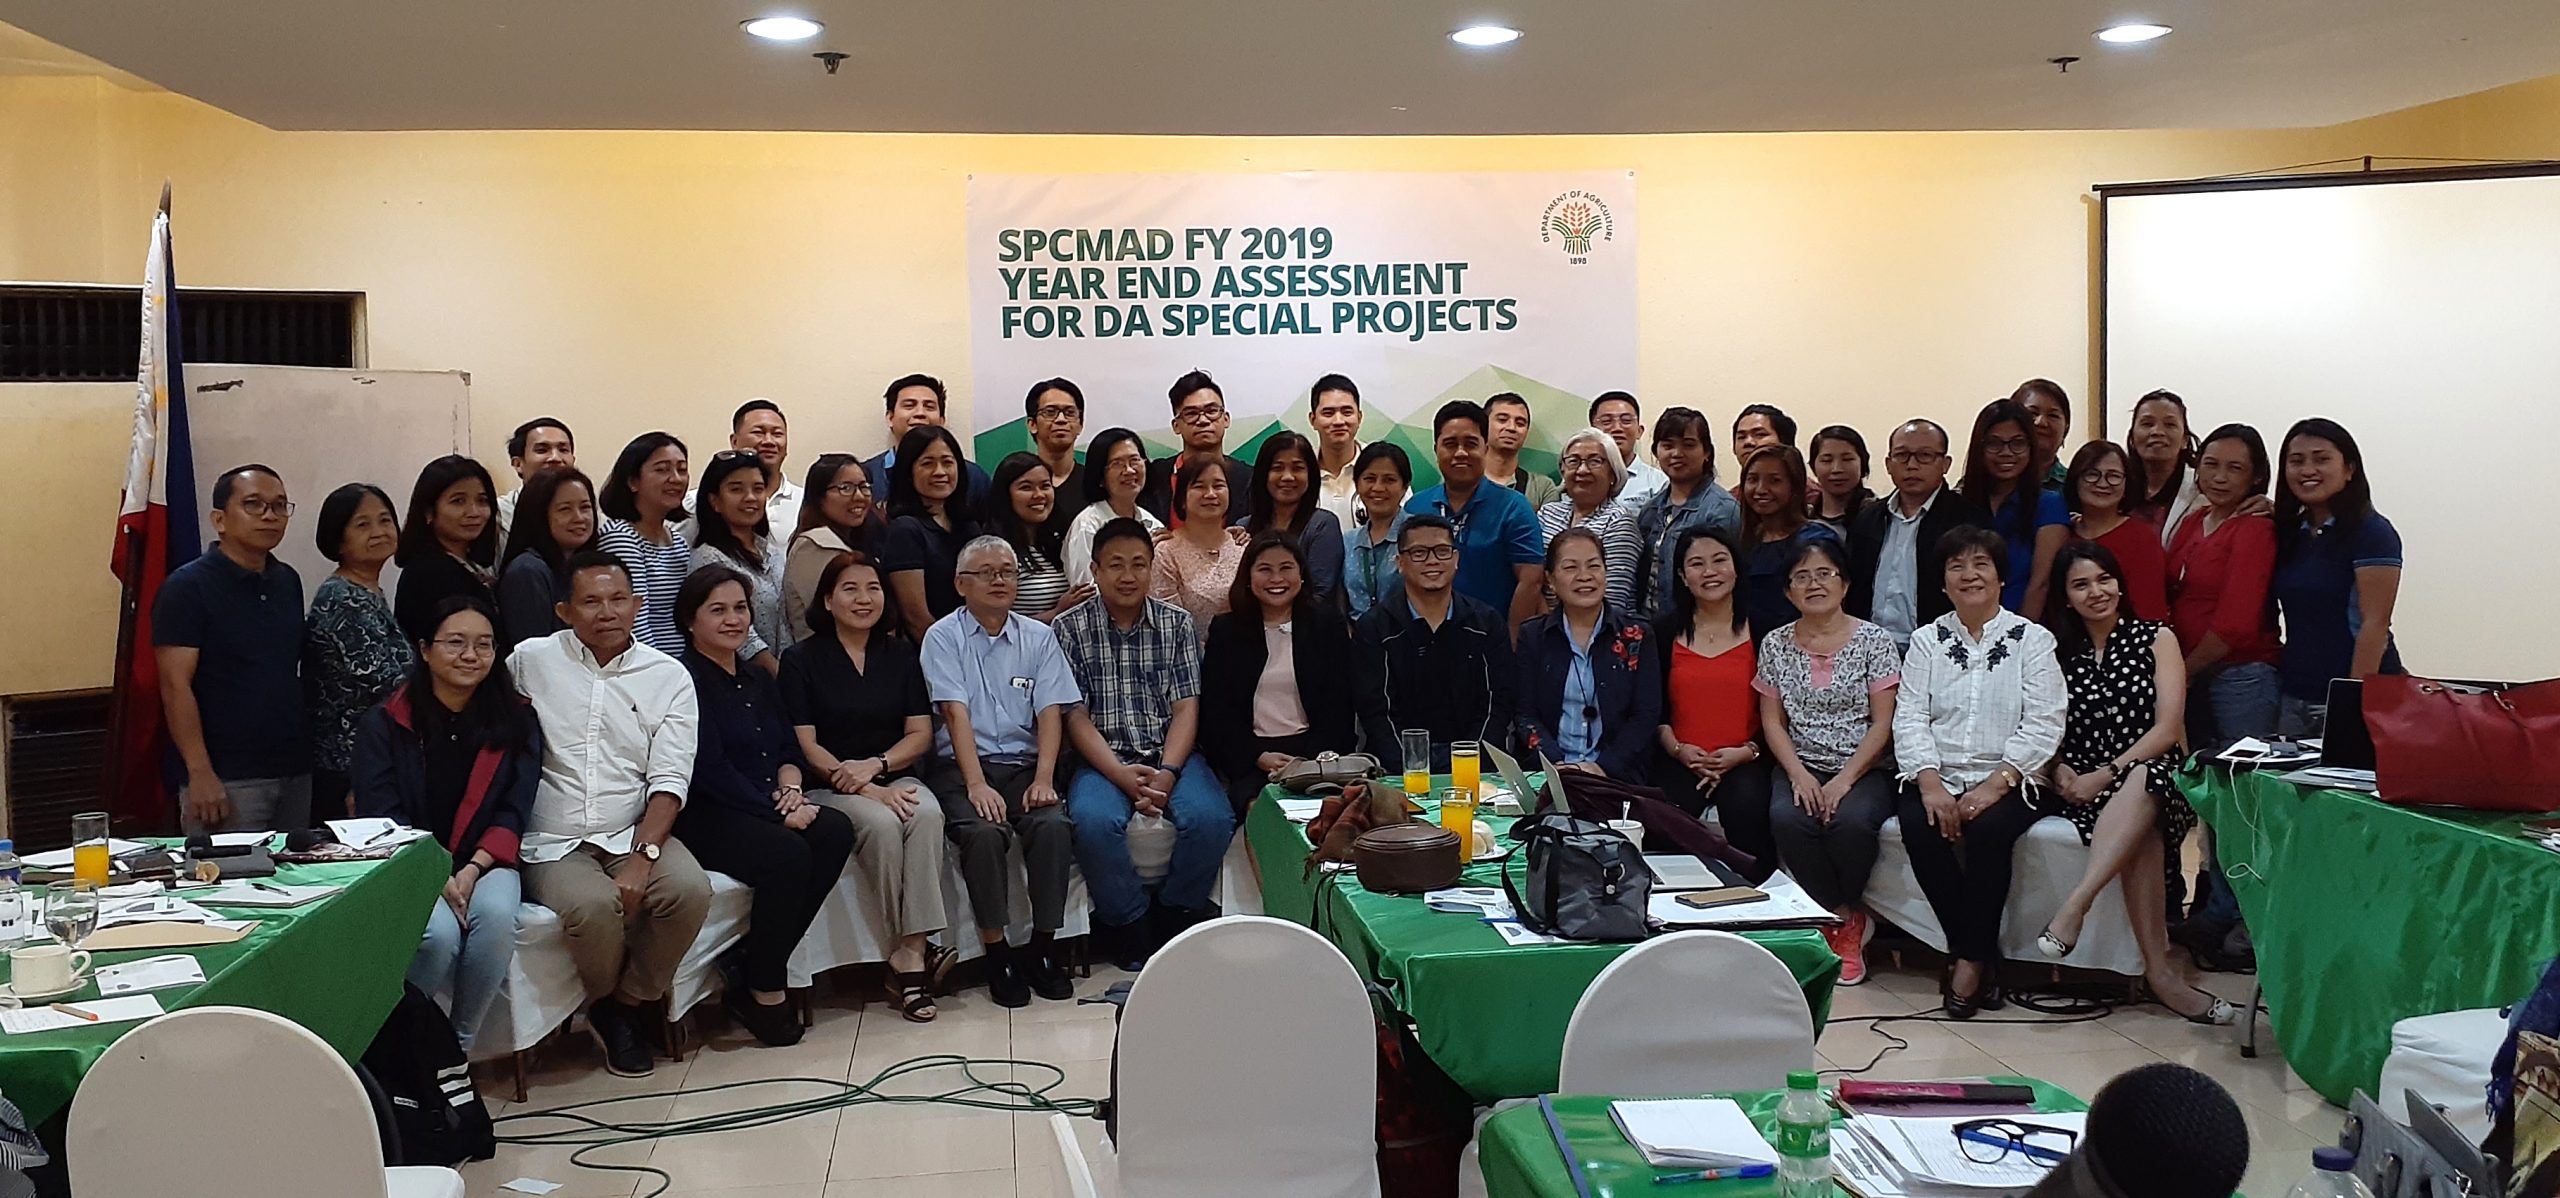 SAAD joins DA-SPCMAD’s 2019 Year-End Assessment